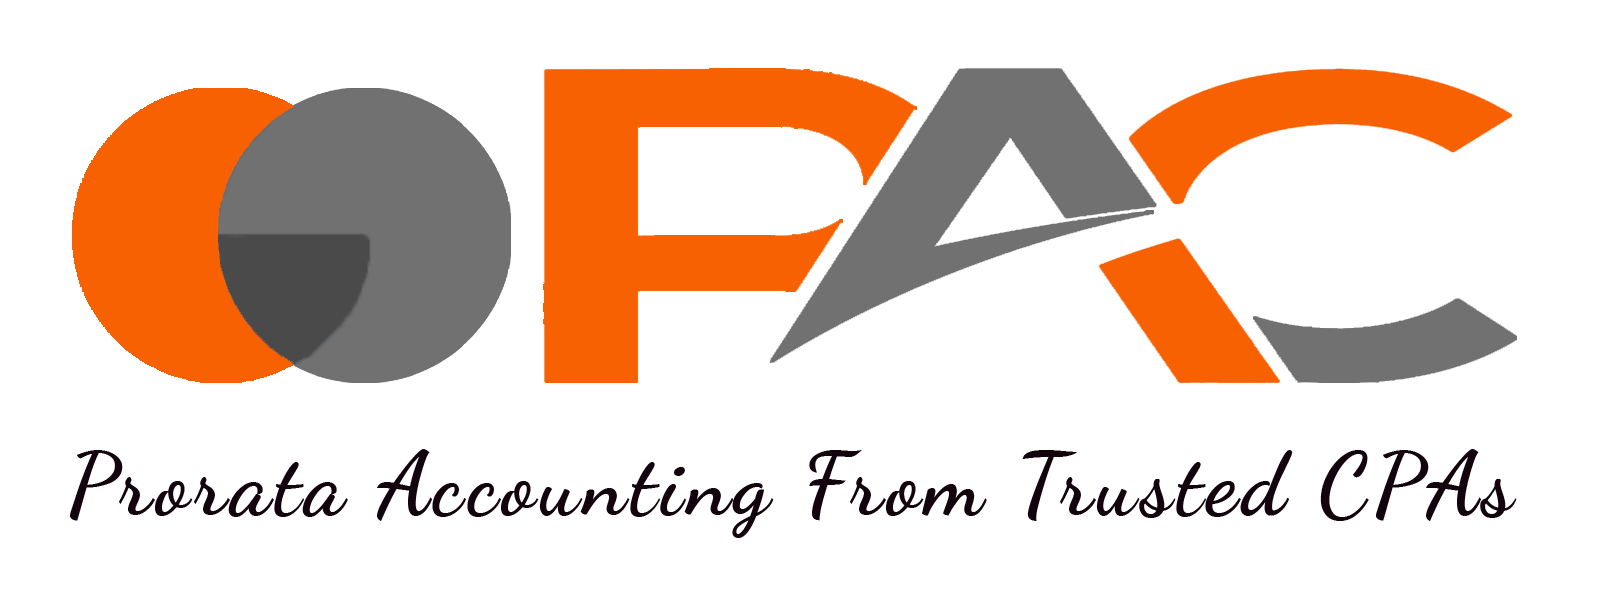 Prorata Accounting and Consulting